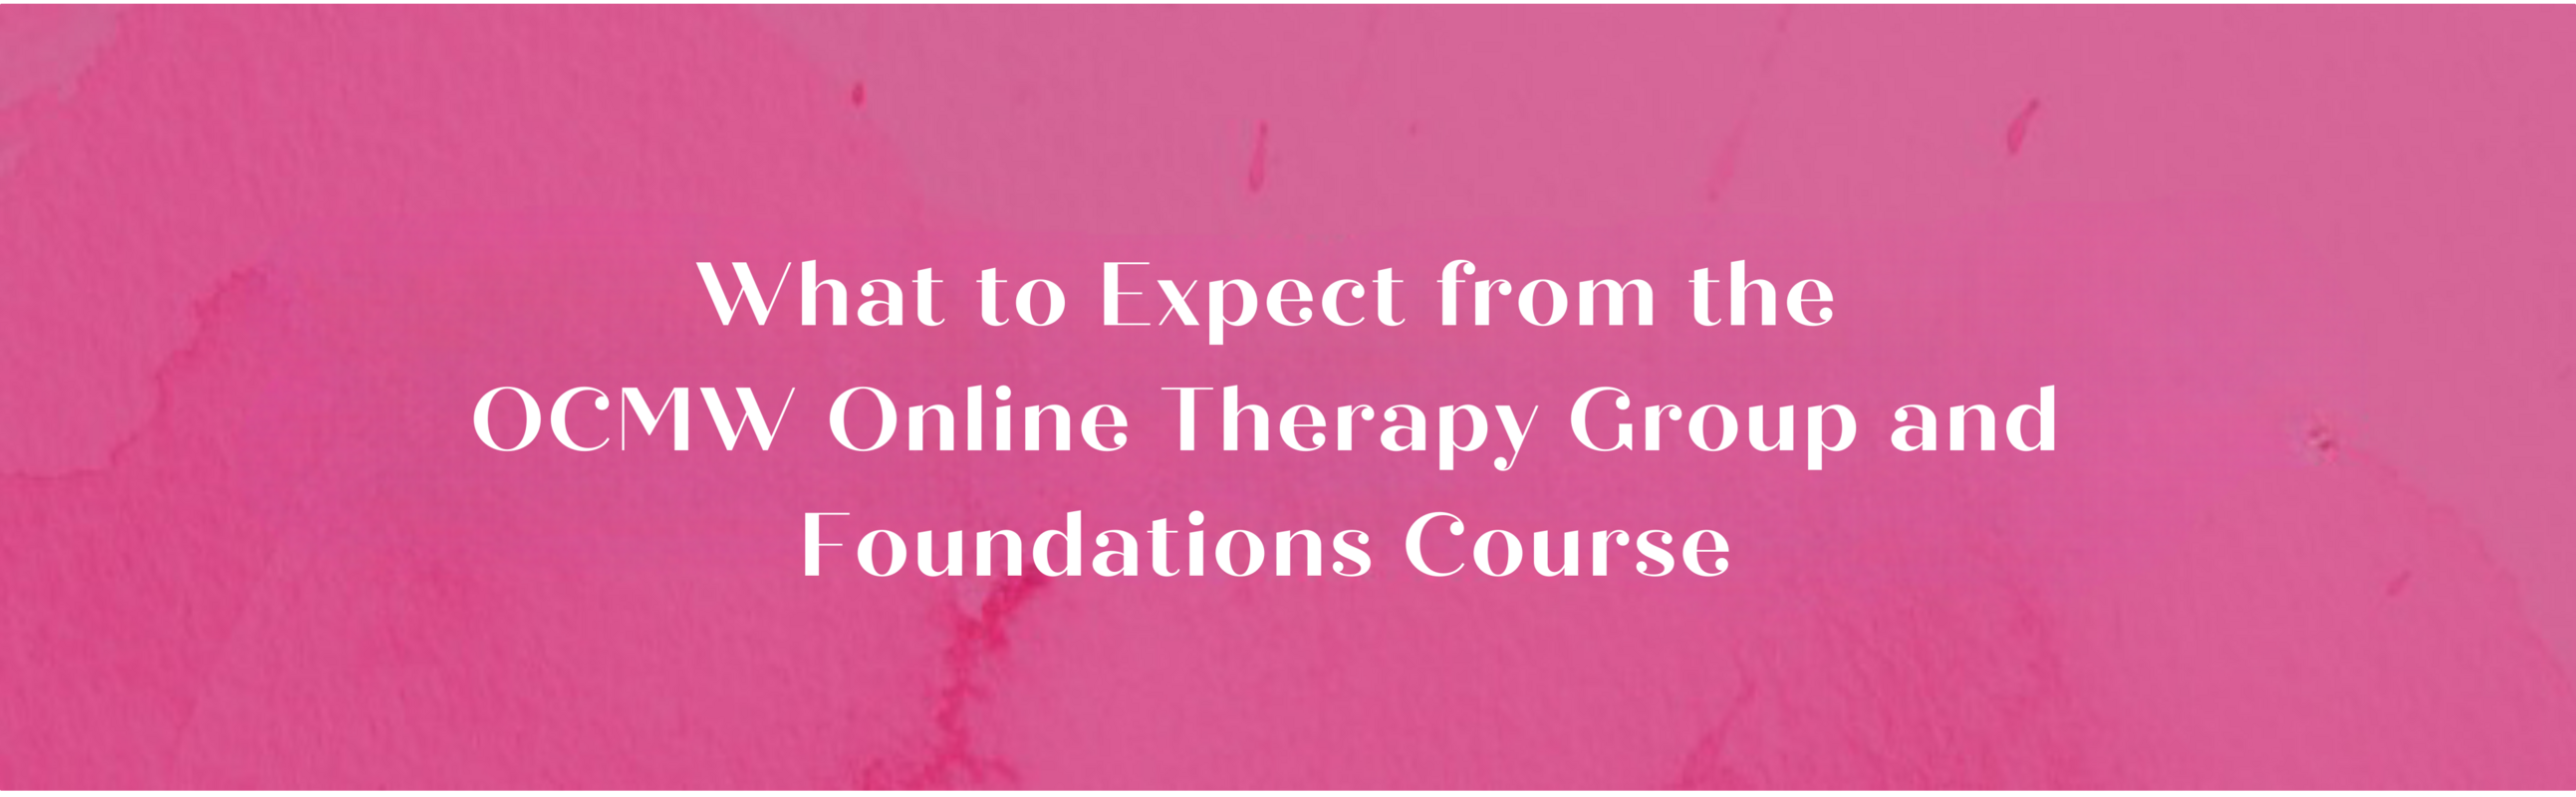 FOUNDATIONS COURSE WHAT TO EXPECT BANNER_clipped_rev_1